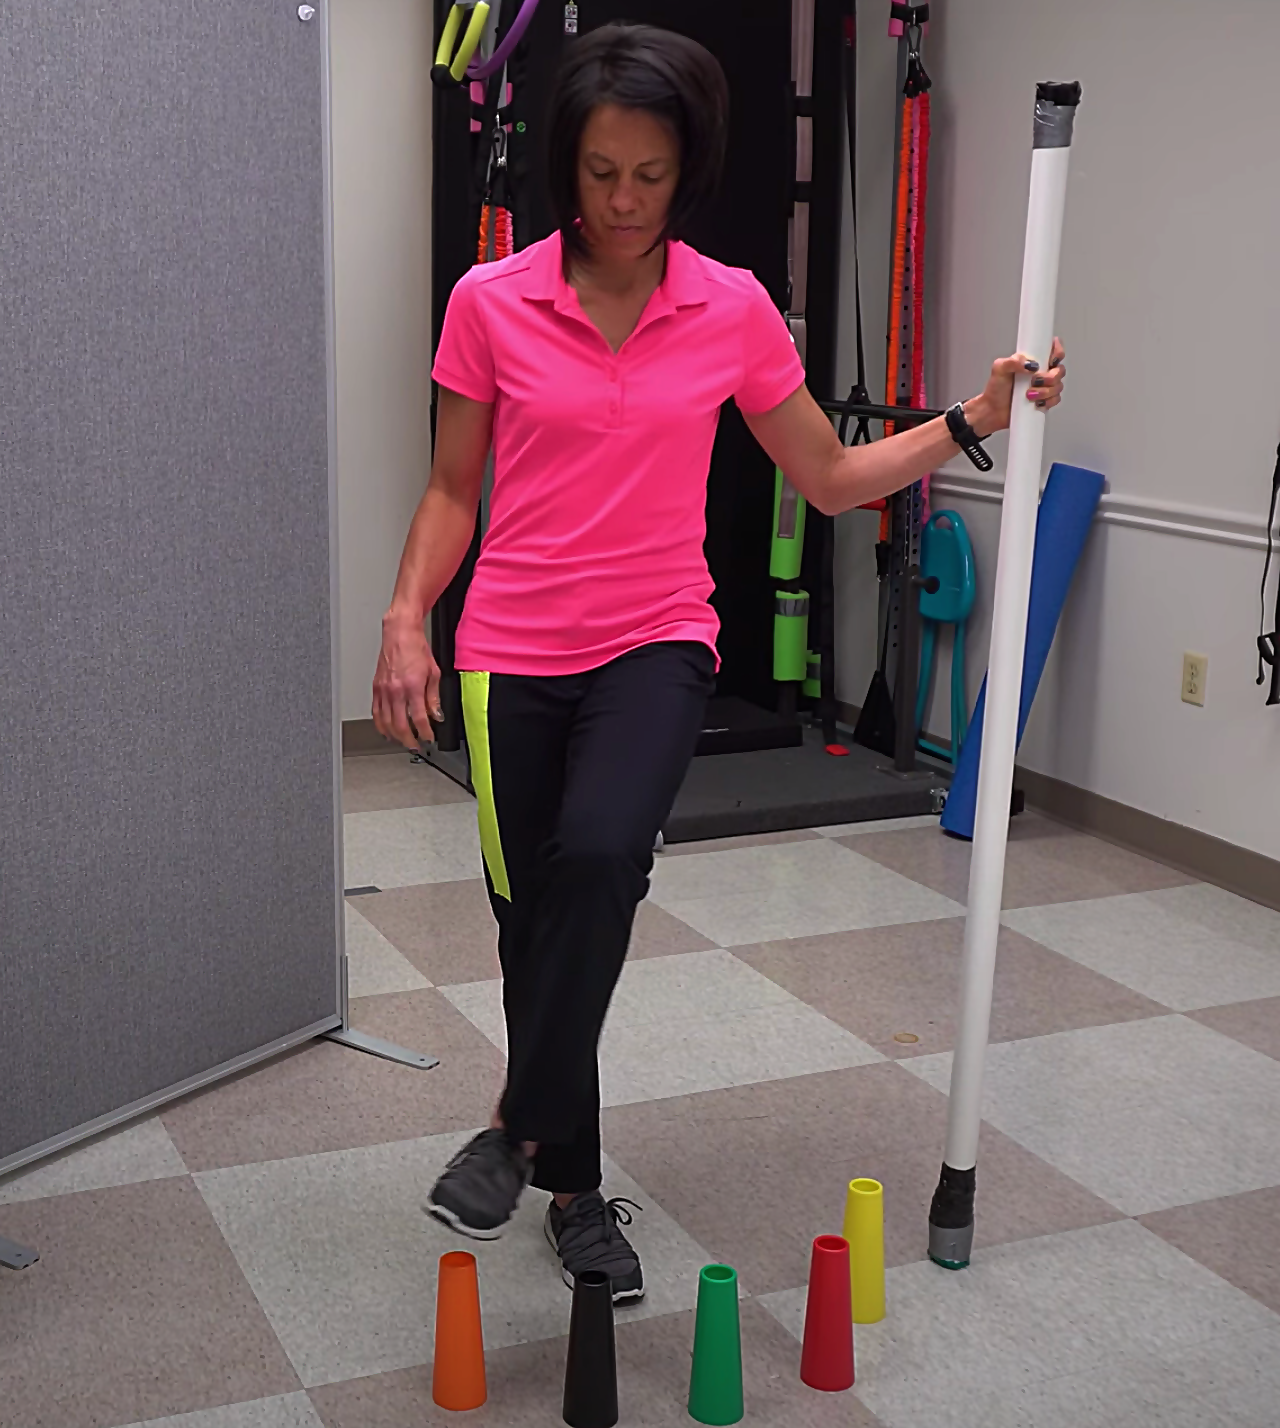 advanced walking exercise with stacking cones and crossing midline